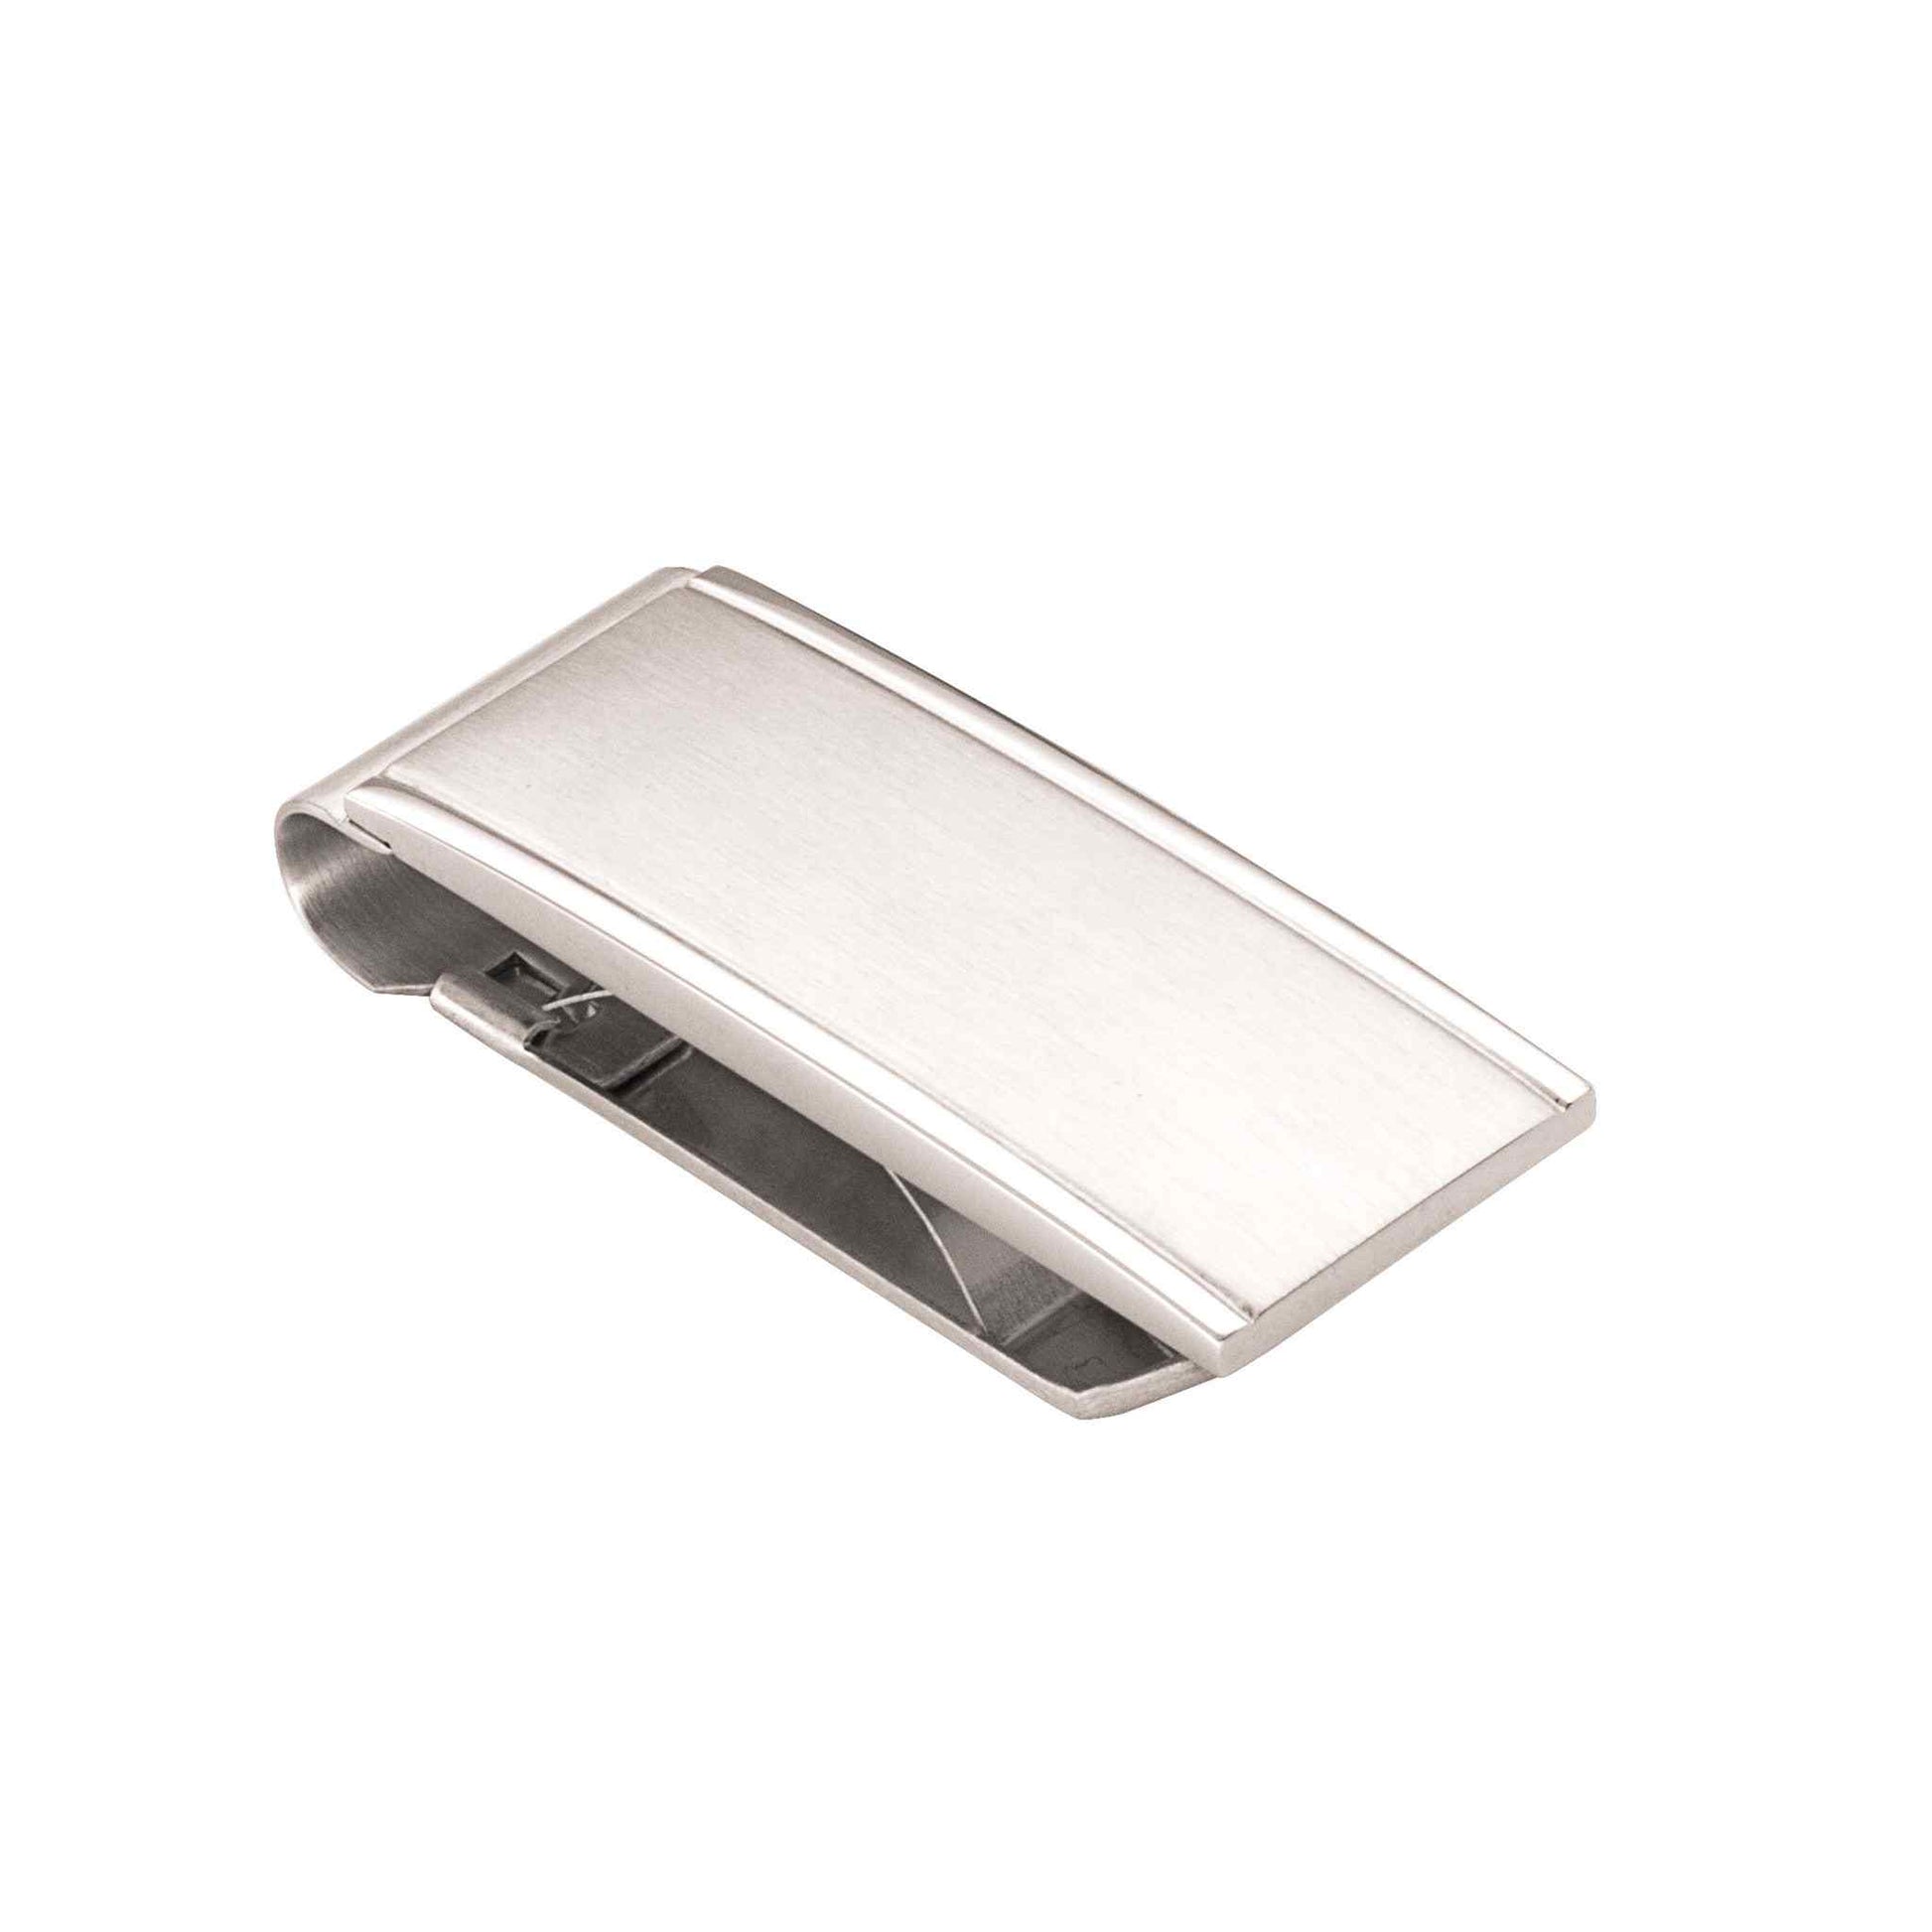 A stainless steel money clip with lined edge displayed on a neutral white background.